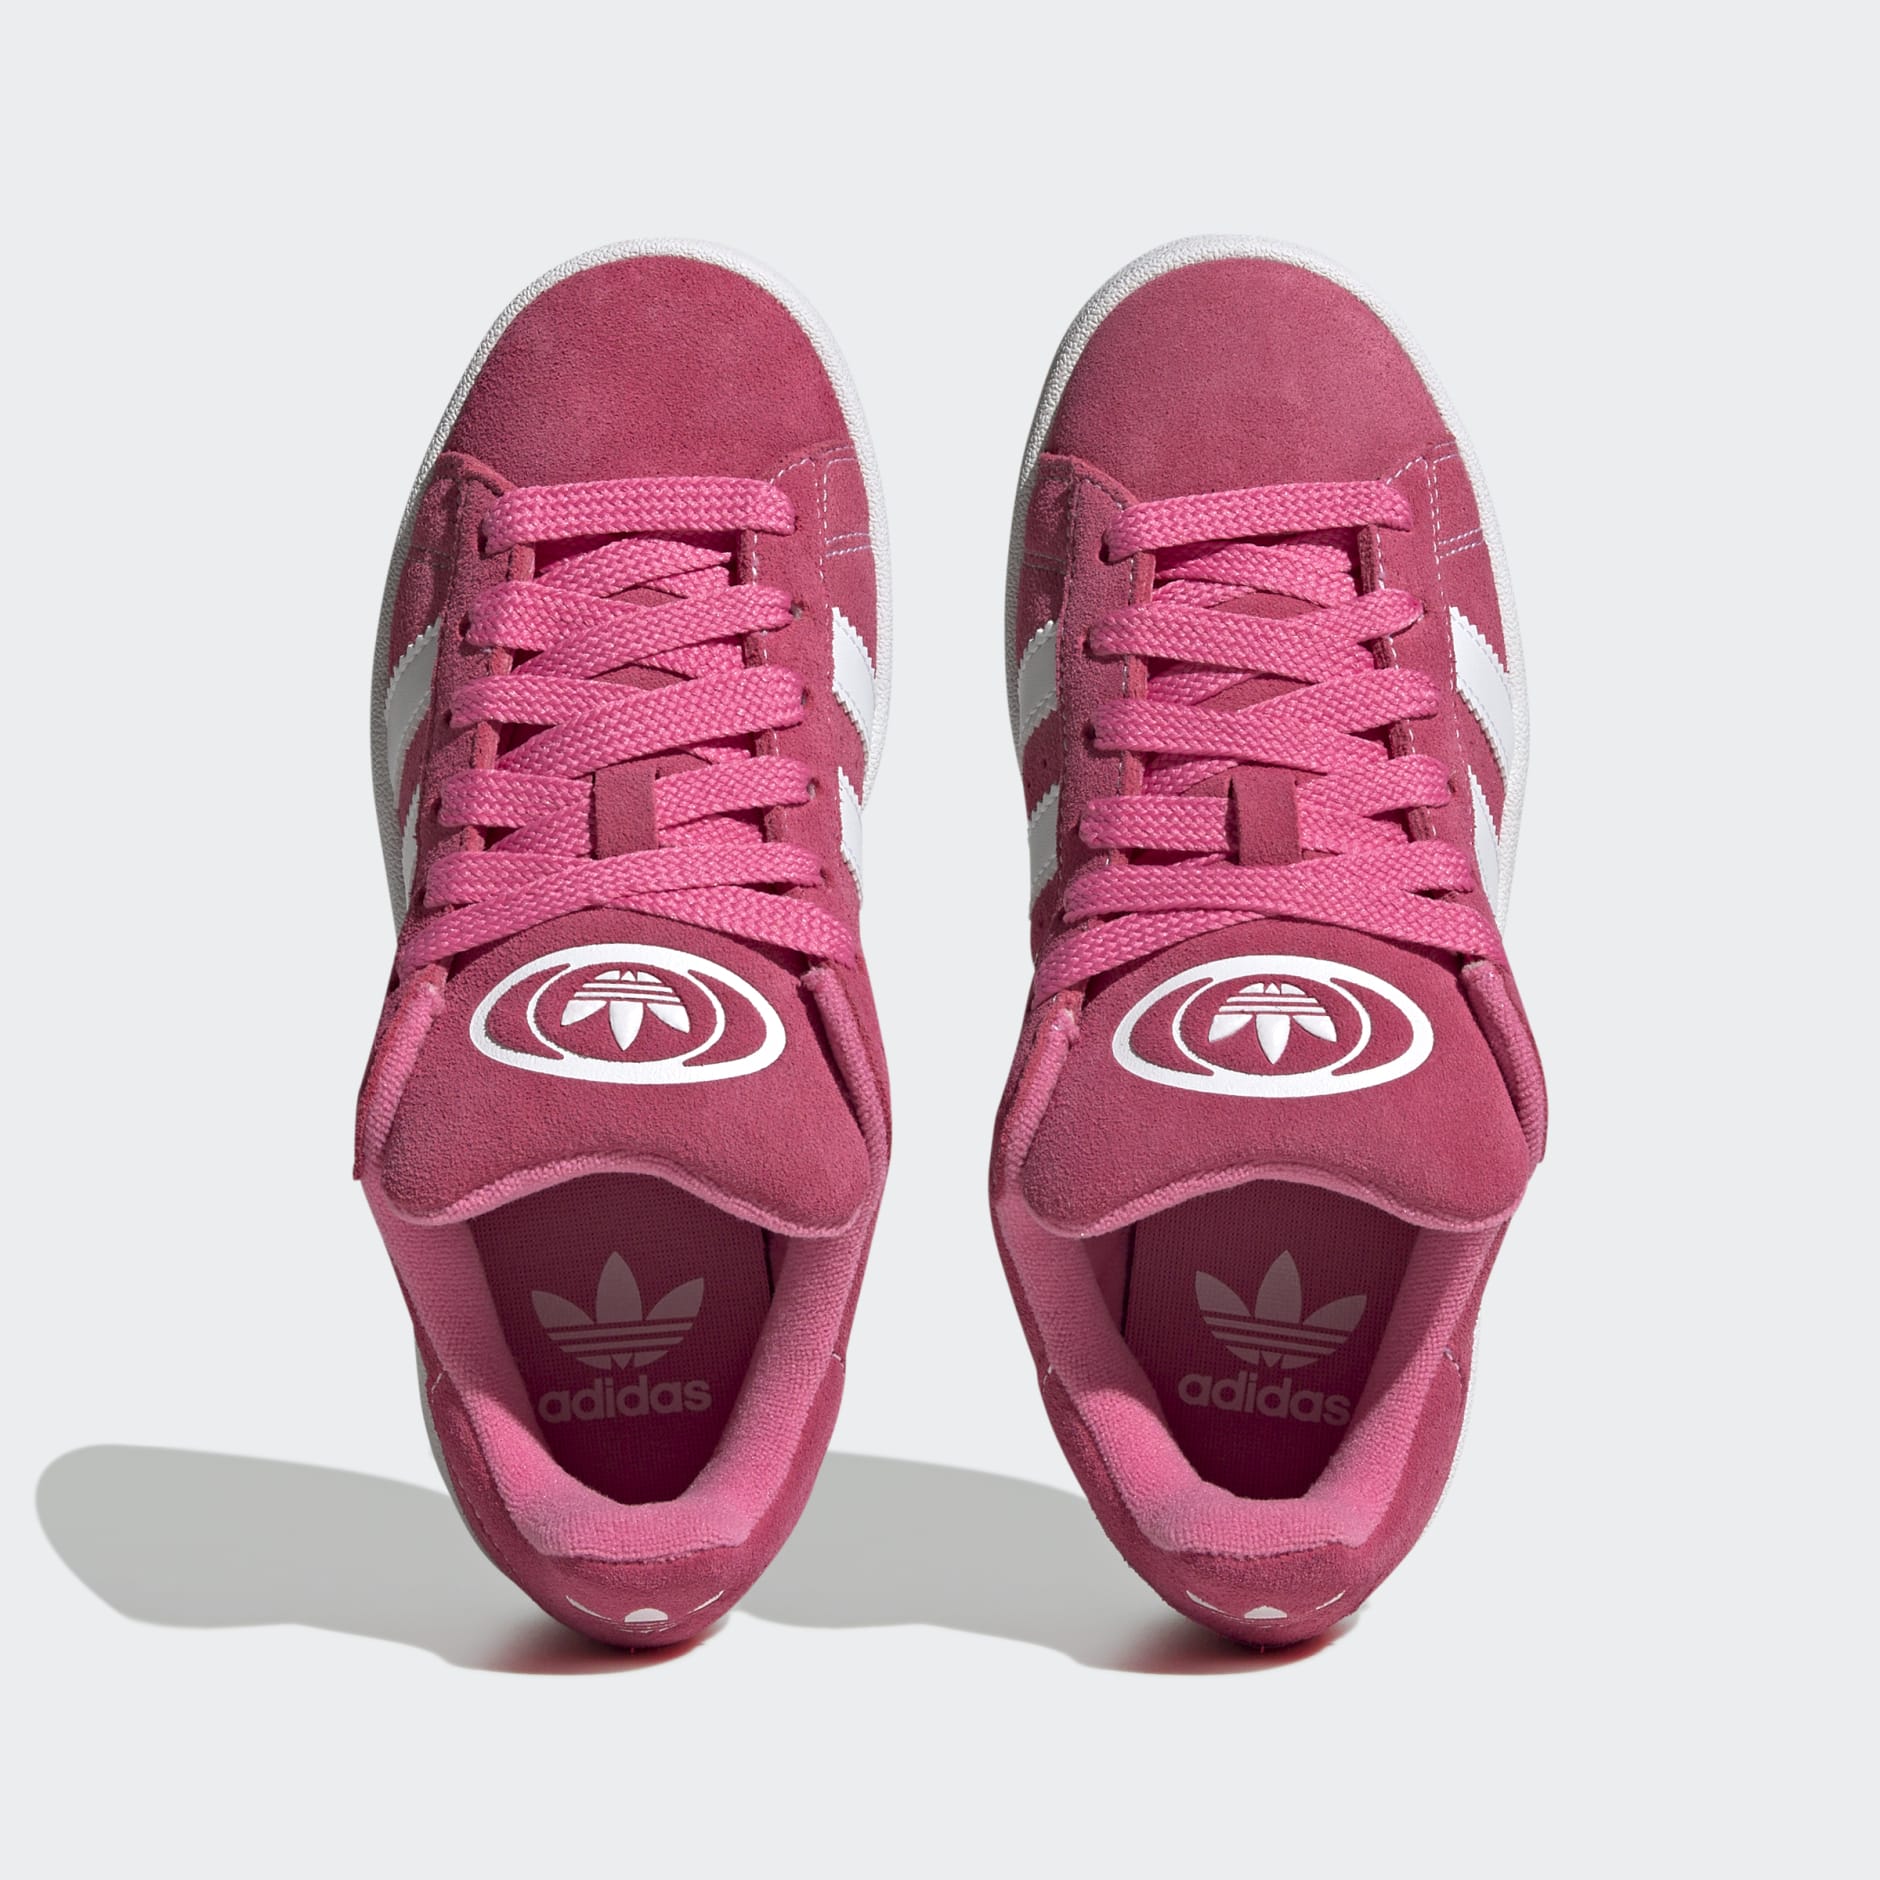 Kids Shoes - 00s Oman adidas - Pink | Shoes Campus